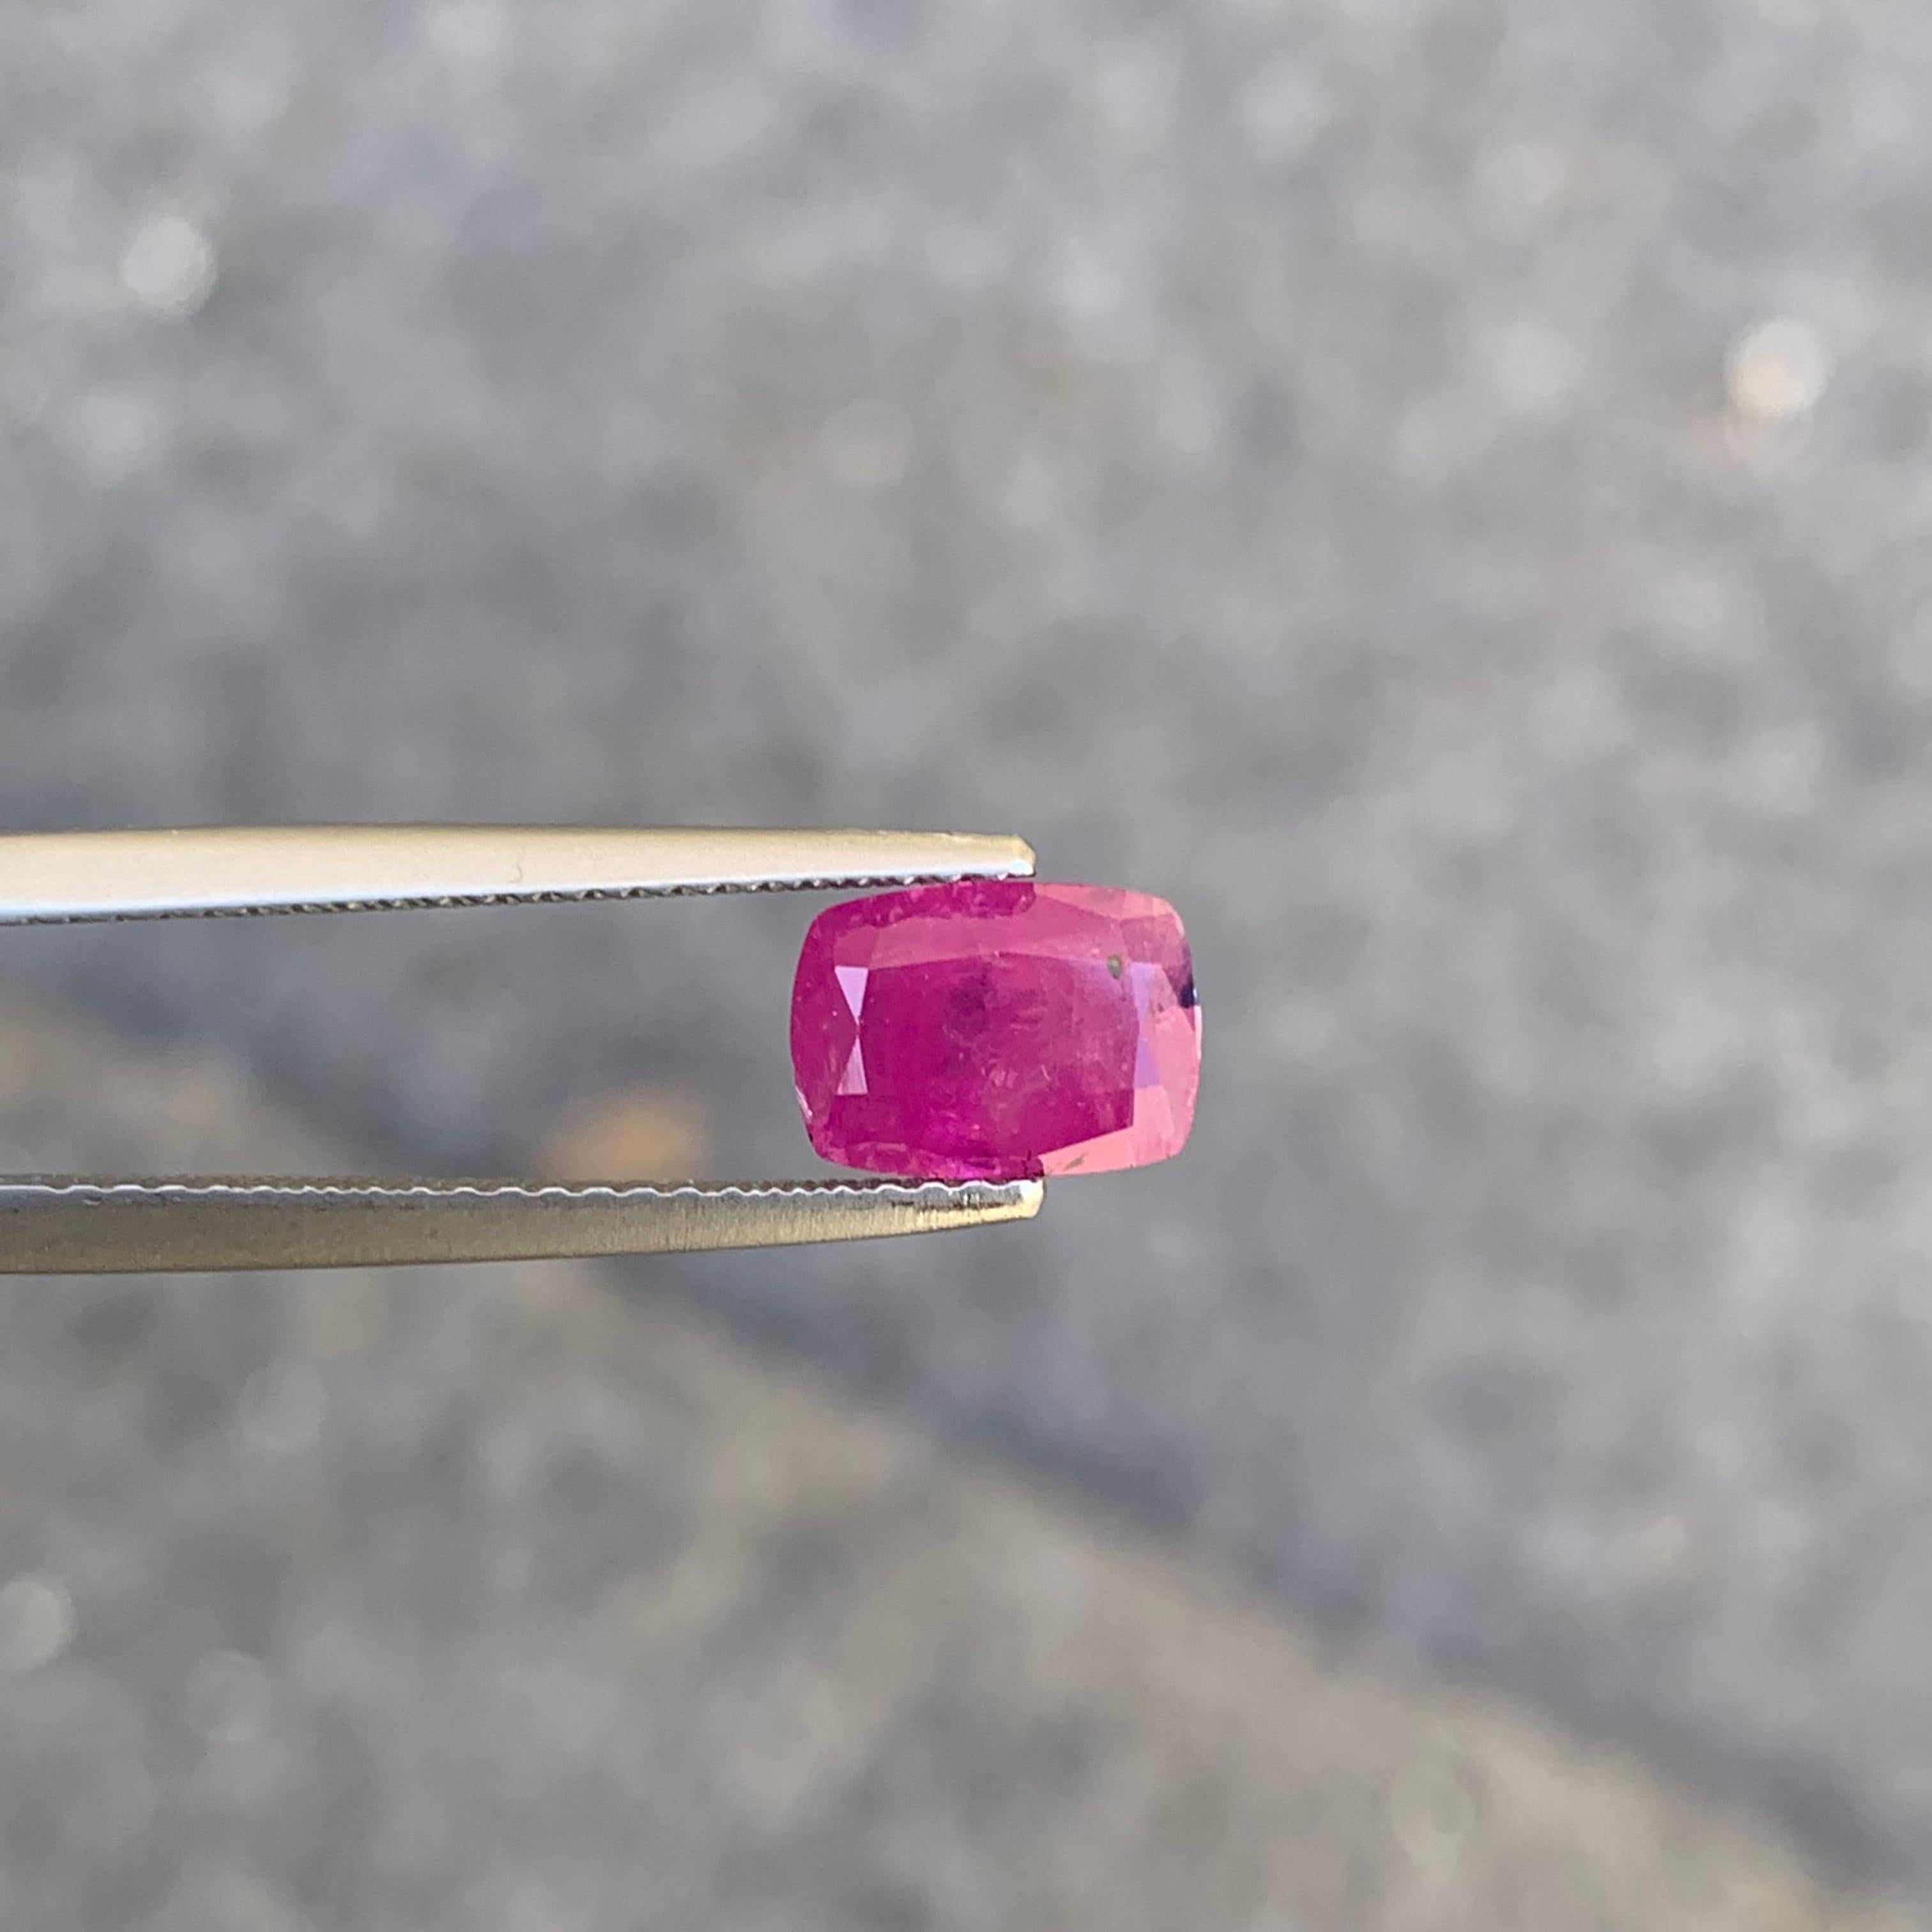 Certified 1.65 Carat Natural Loose Ruby Corundum From Afghan Mine Ring Gemstone For Sale 2